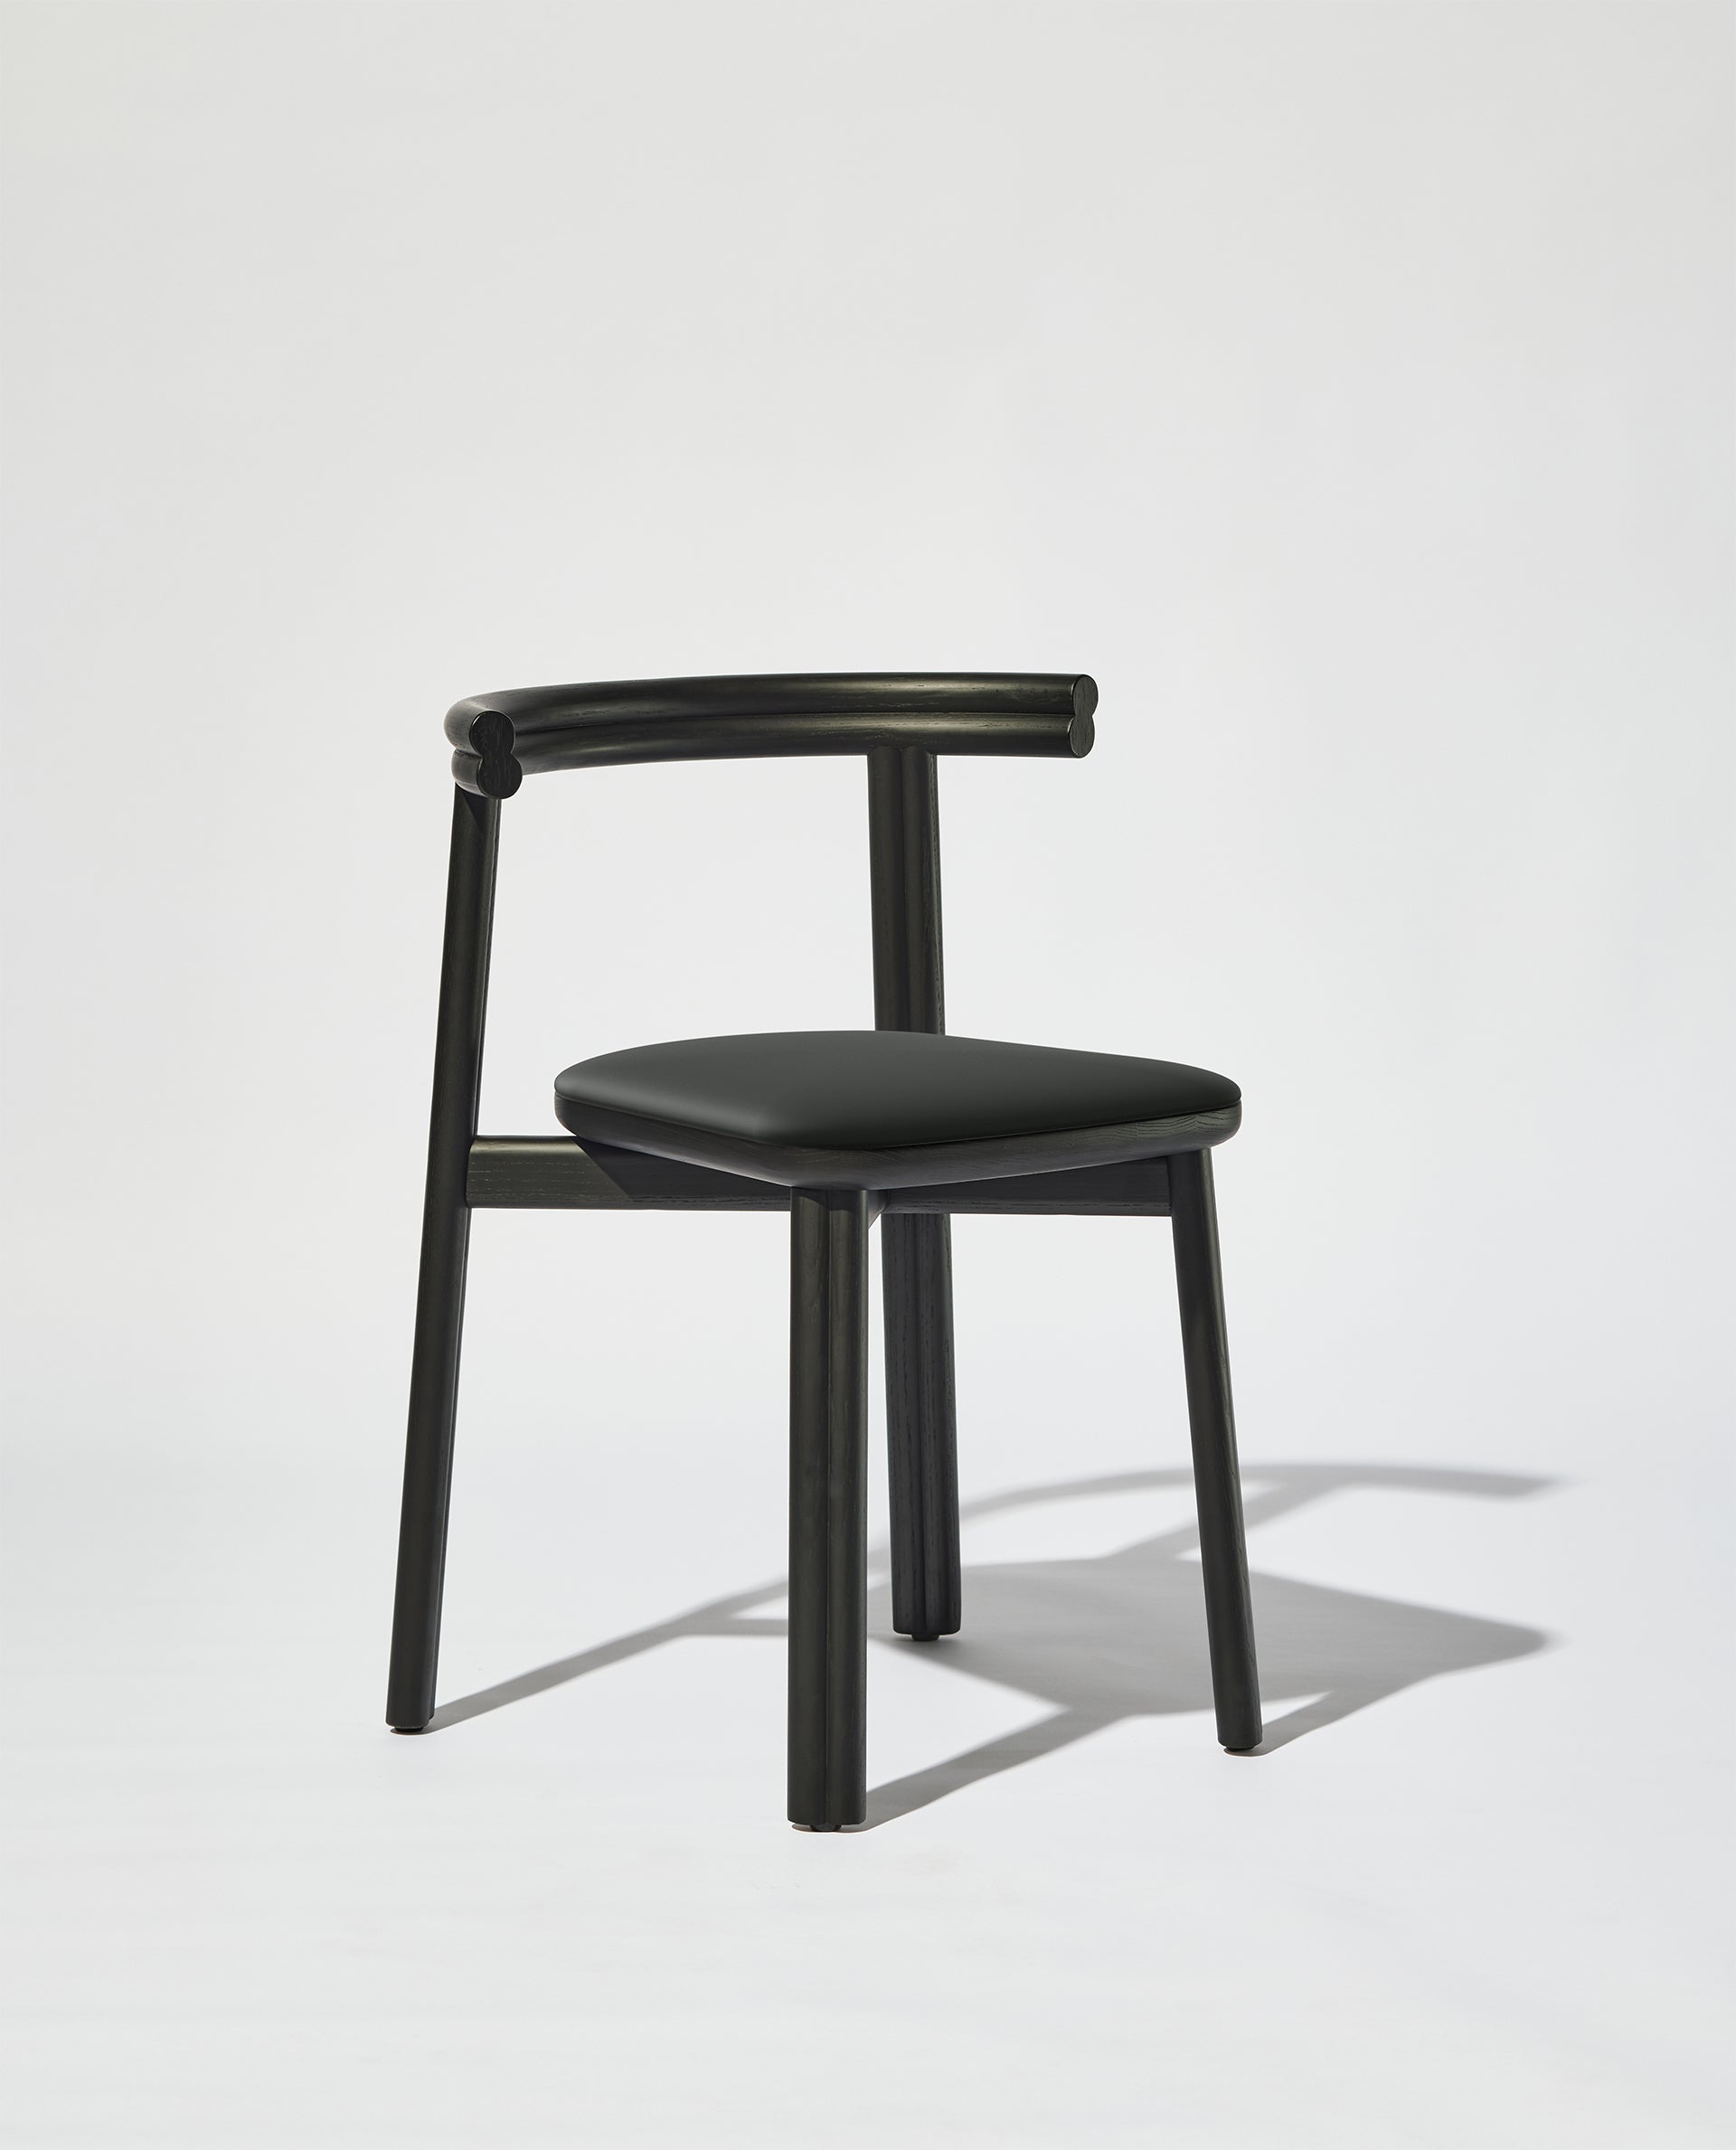 Twill Chair Upholstered Seat | Black Timber Dining Chair | GibsonKarlo | DesignByThem ** HL1 Leather Primary BA90 Black